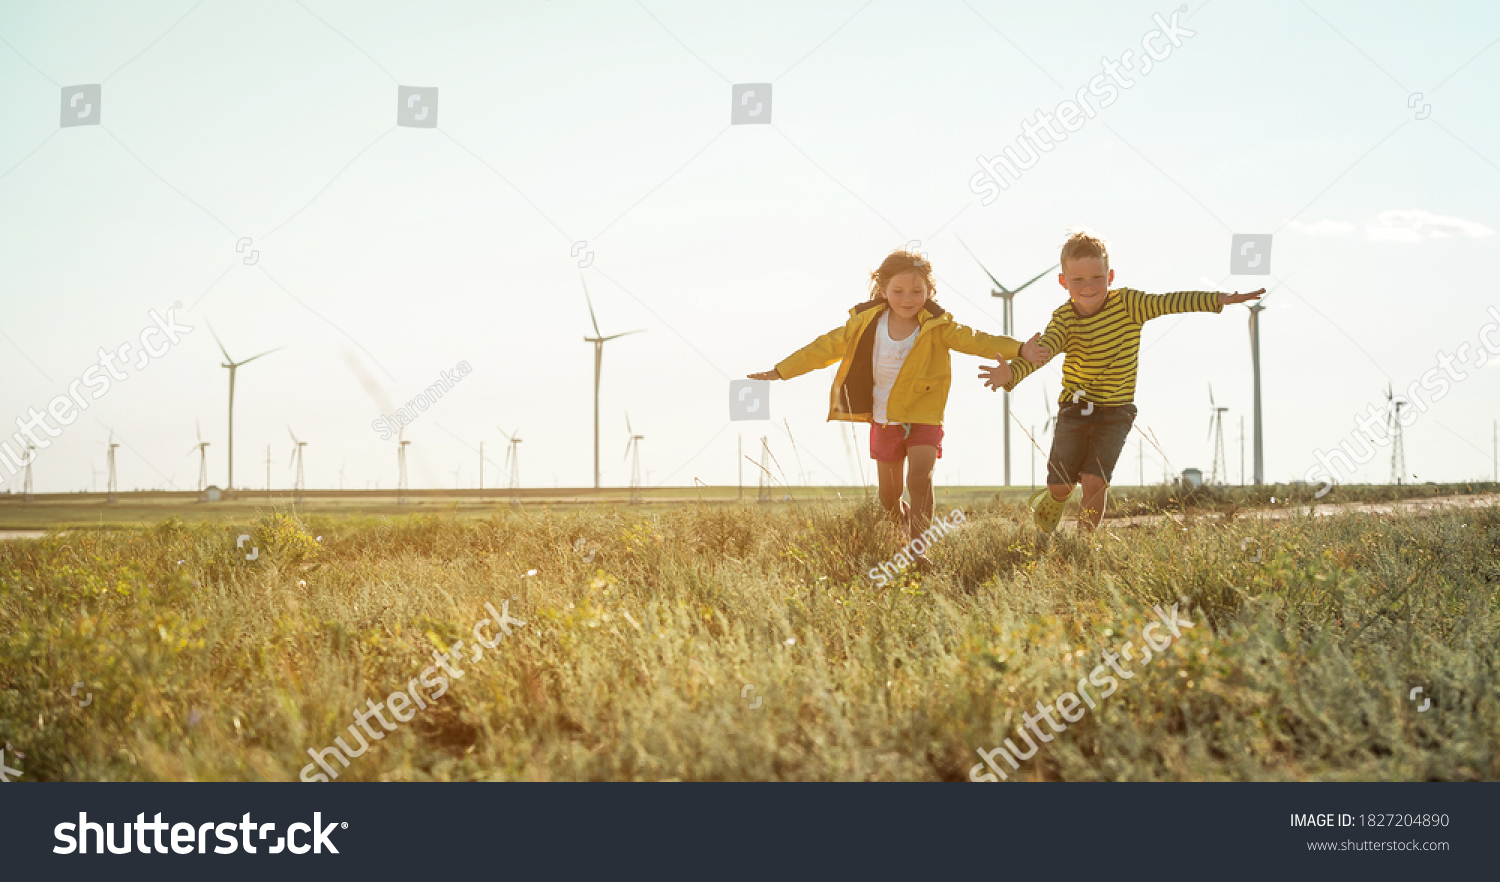 Little girl and boy are running in front of windmills. Renewable energies and sustainable resources - wind mills. children playing with the wind near a wind turbine. Sustainable climate visuals #1827204890